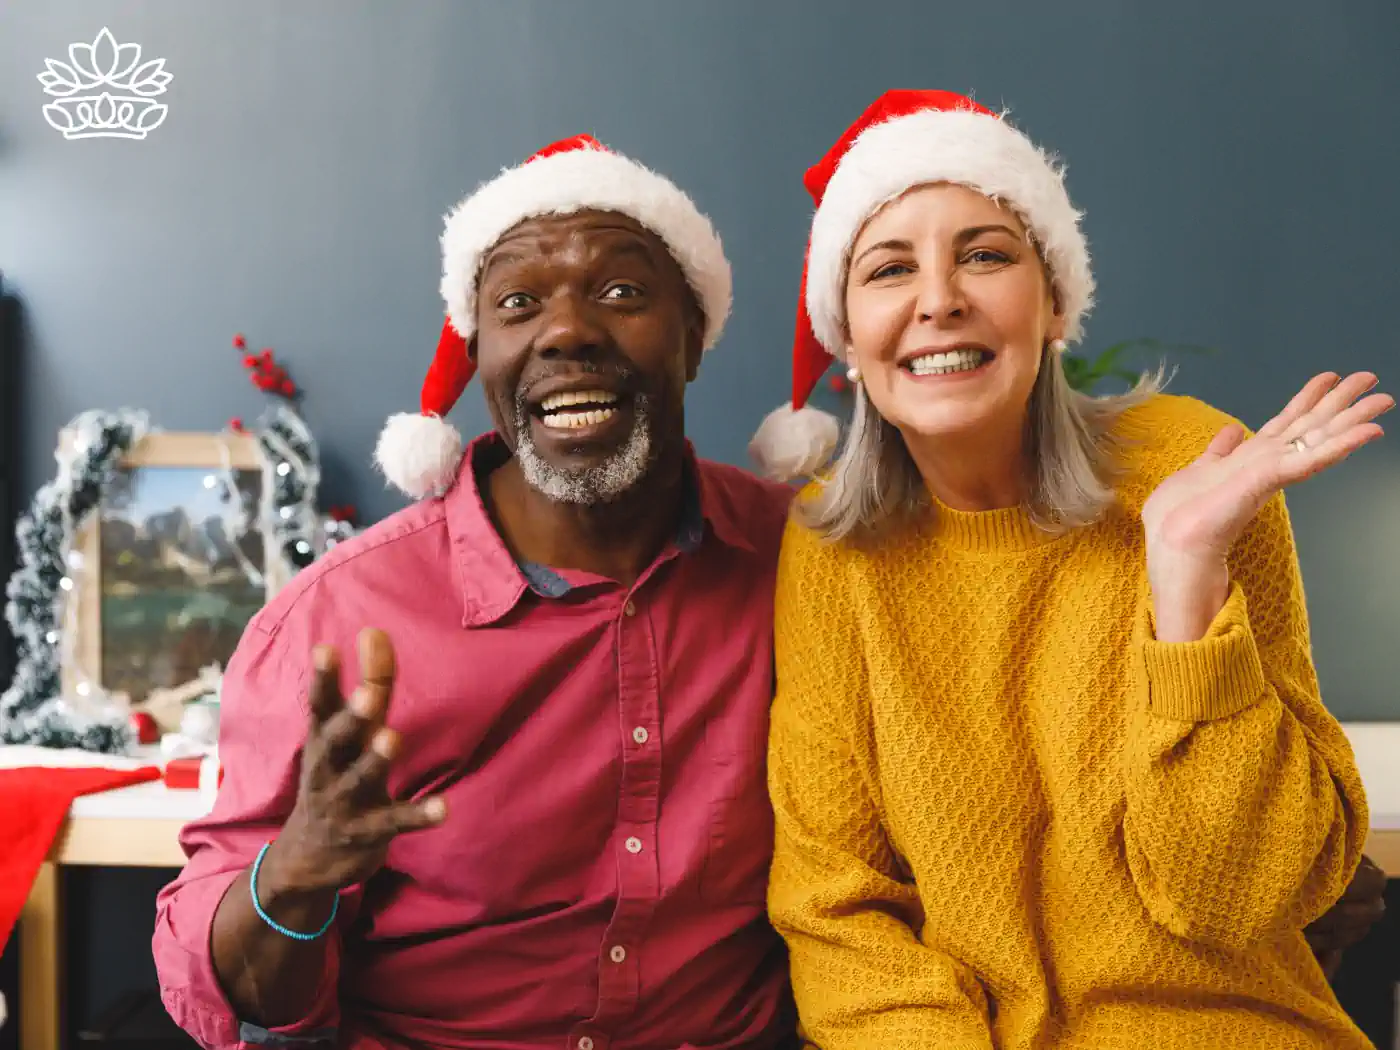 A joyful couple in Santa hats, surrounded by festive decorations, sharing holiday cheer. Part of the Festive Season Flowers Collection. Delivered with Heart by Fabulous Flowers and Gifts.